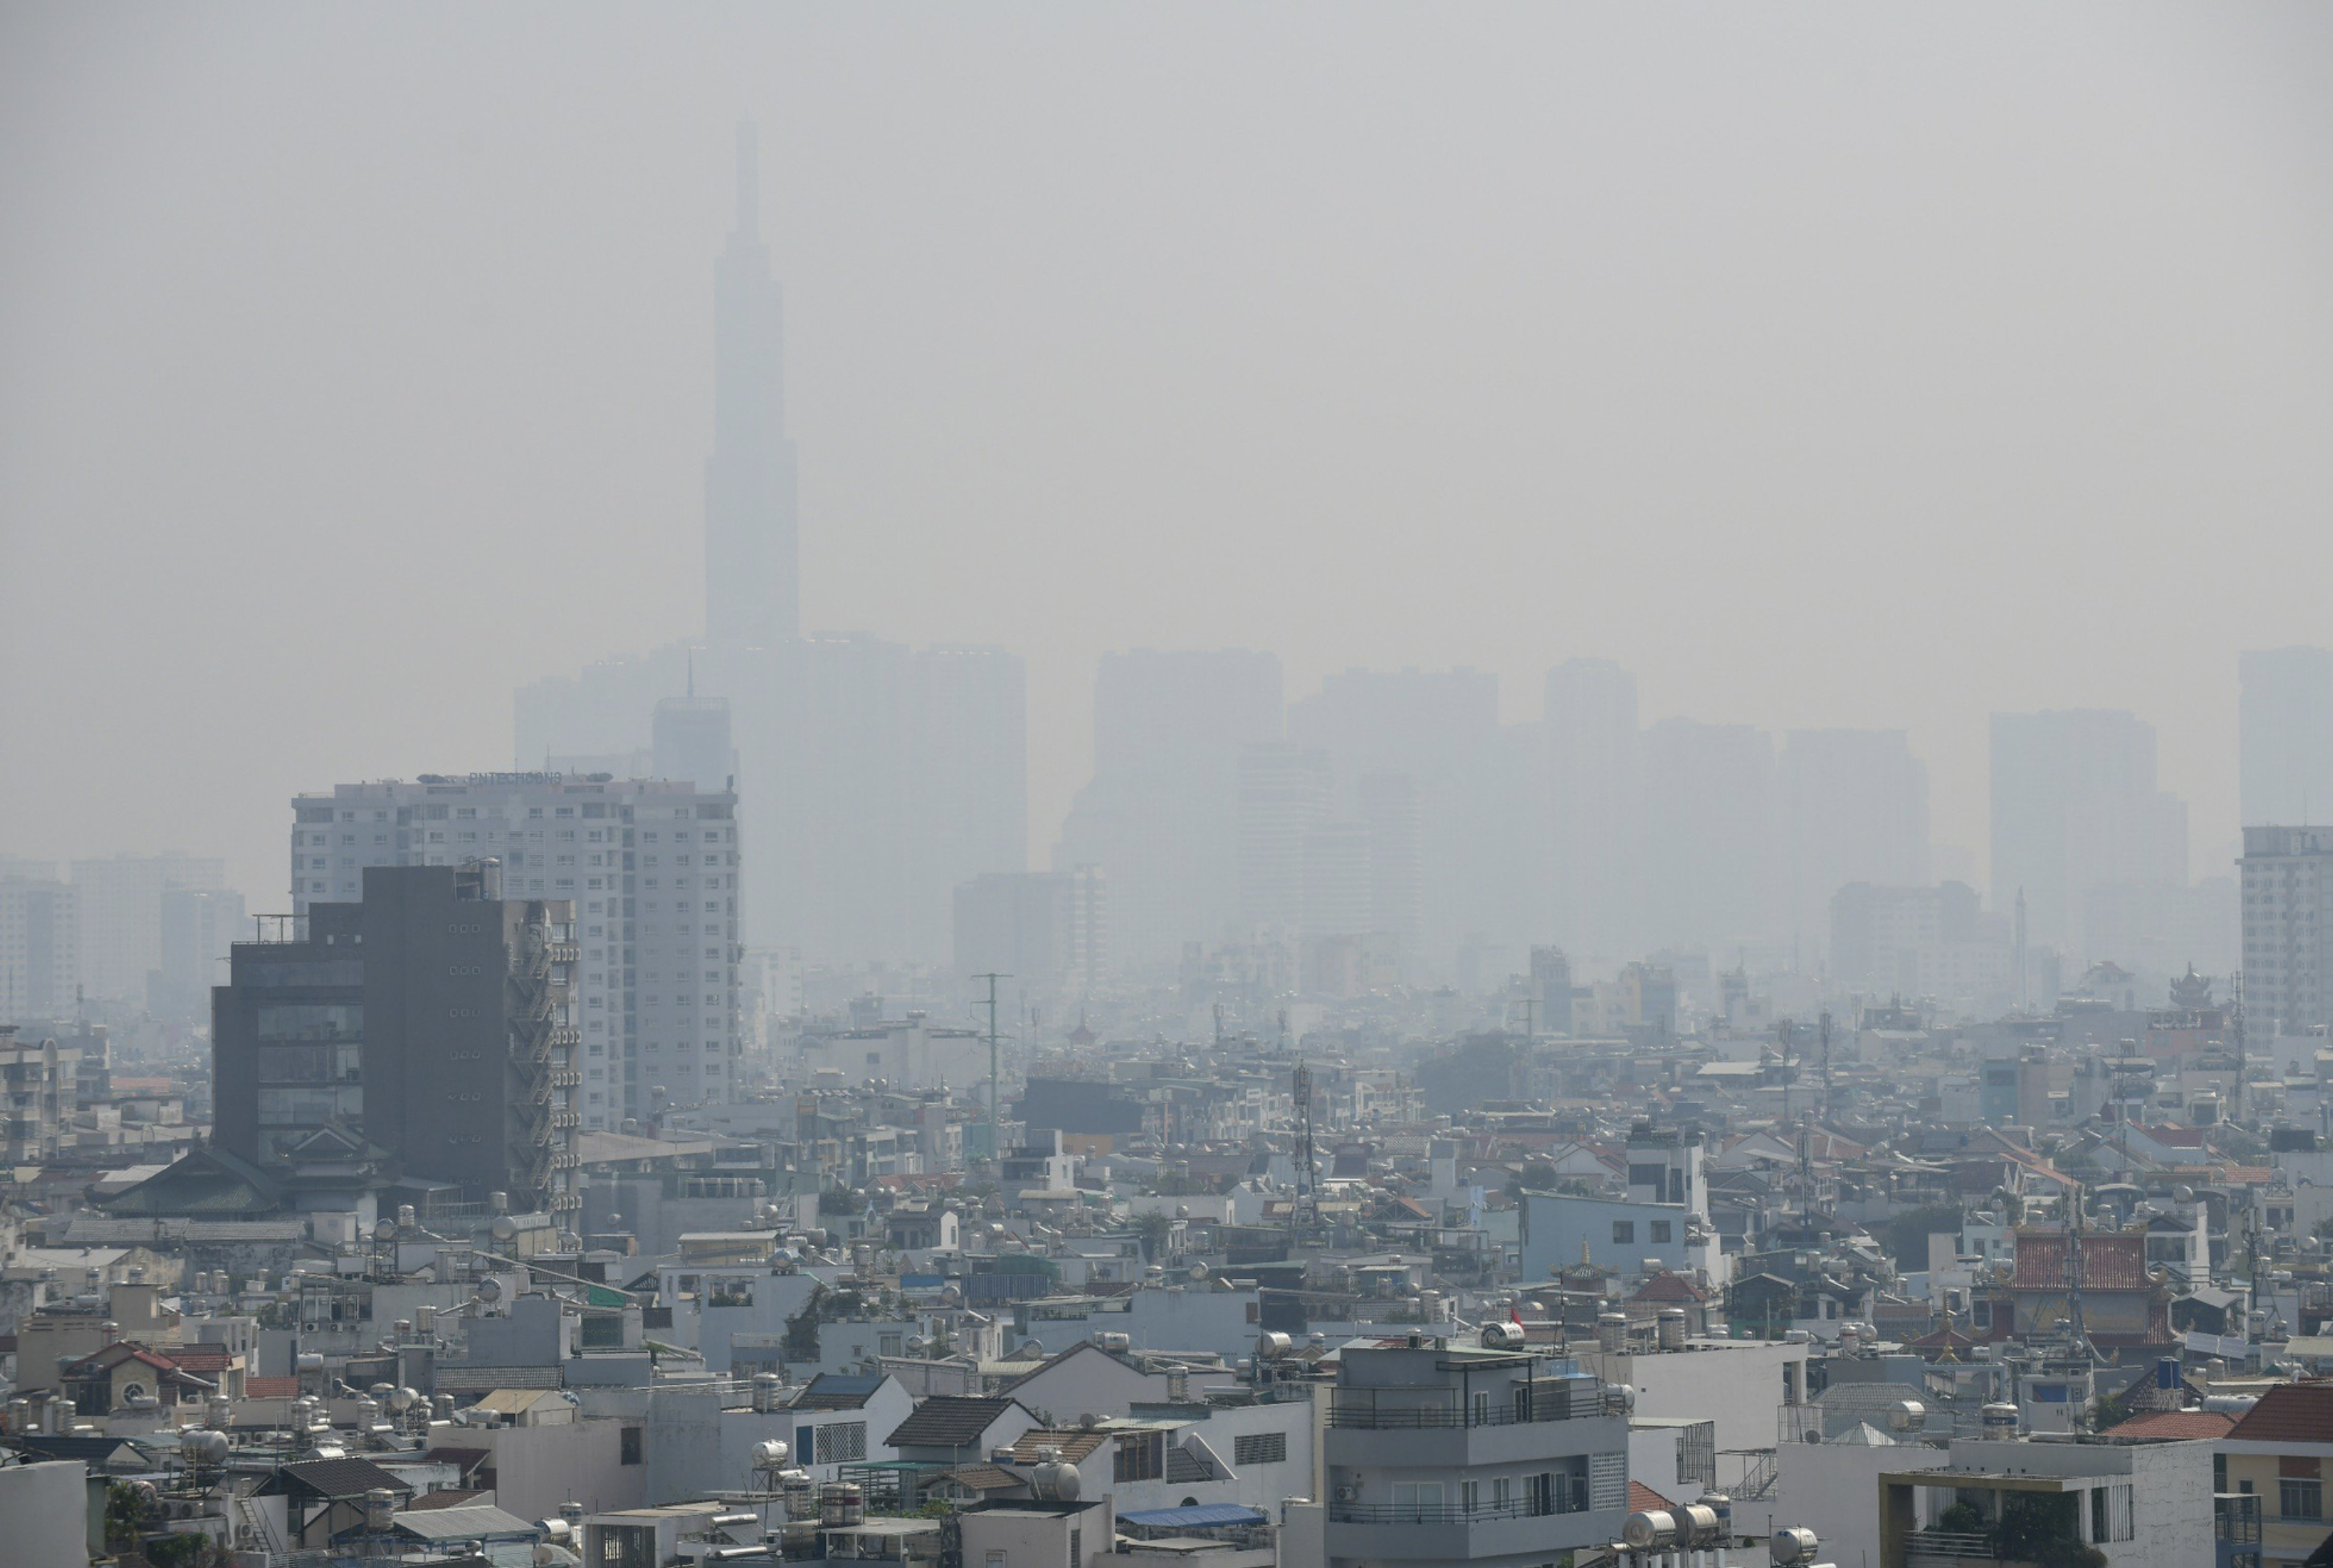 Ho Chi Minh City blanketed in polluted air, smog these days